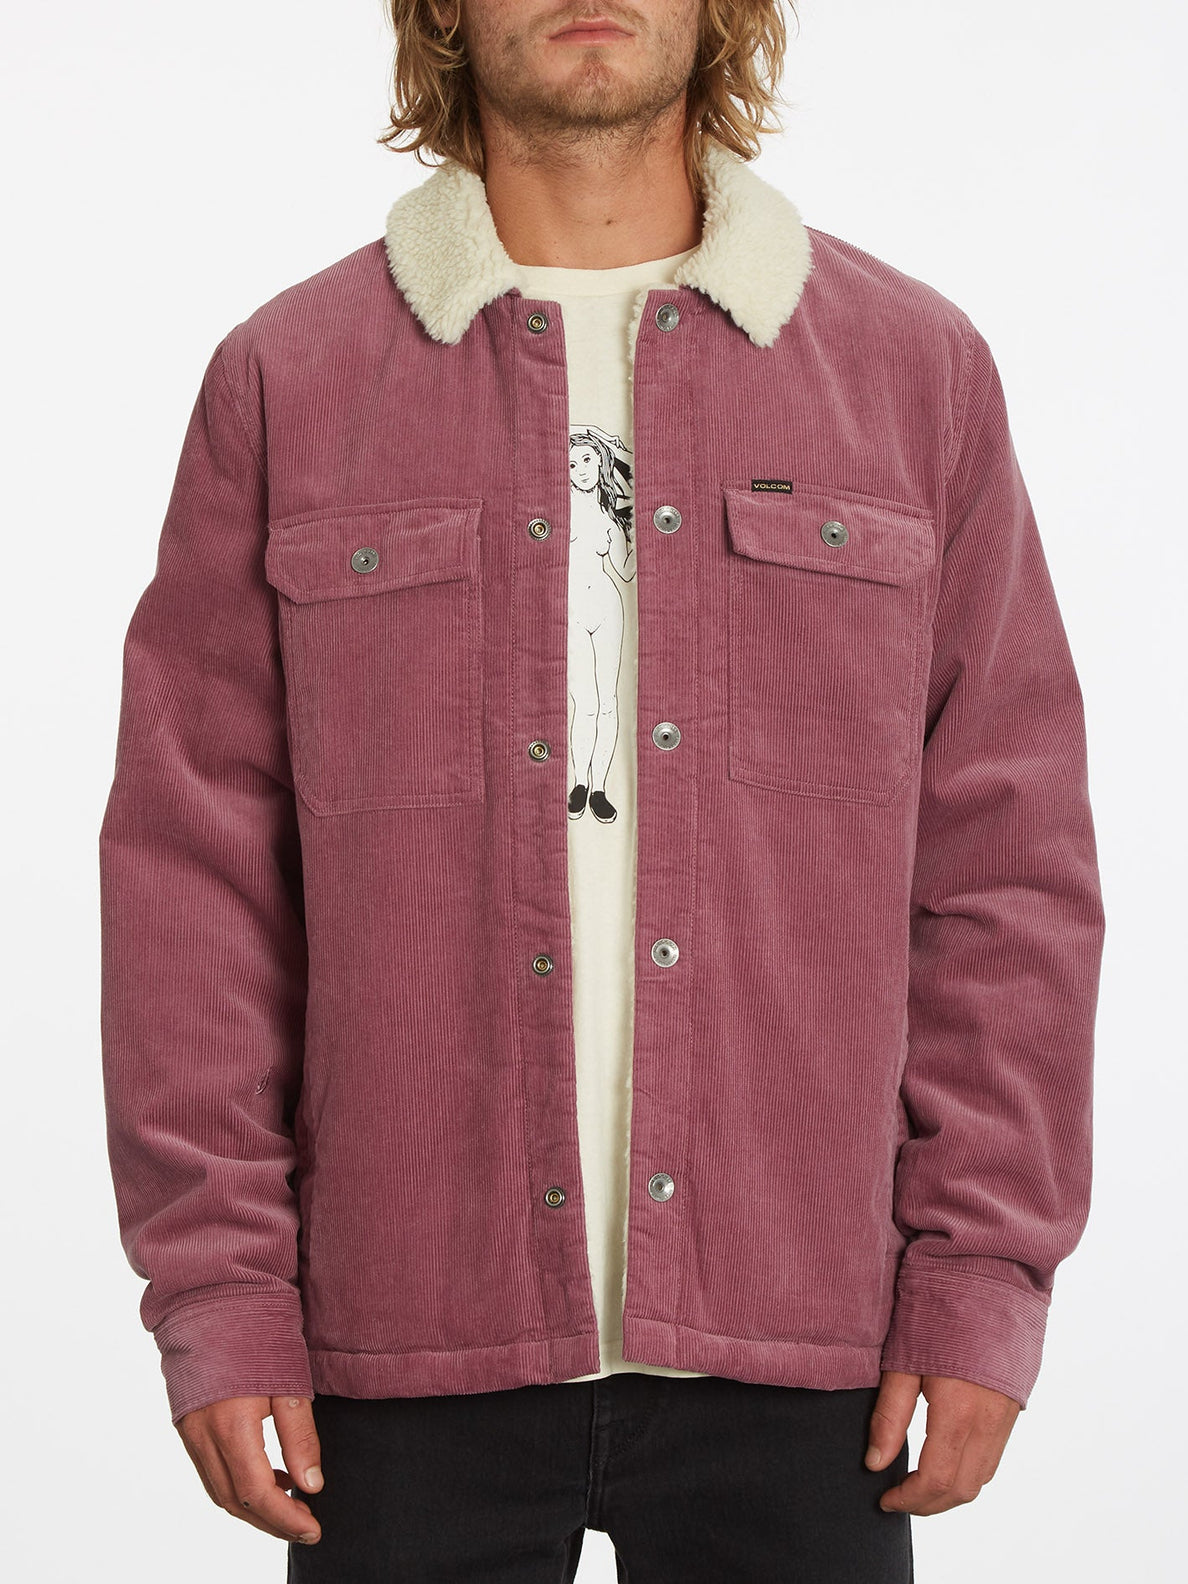 Keaton Jacket - ORCHID (A1732203_ORD) [2]